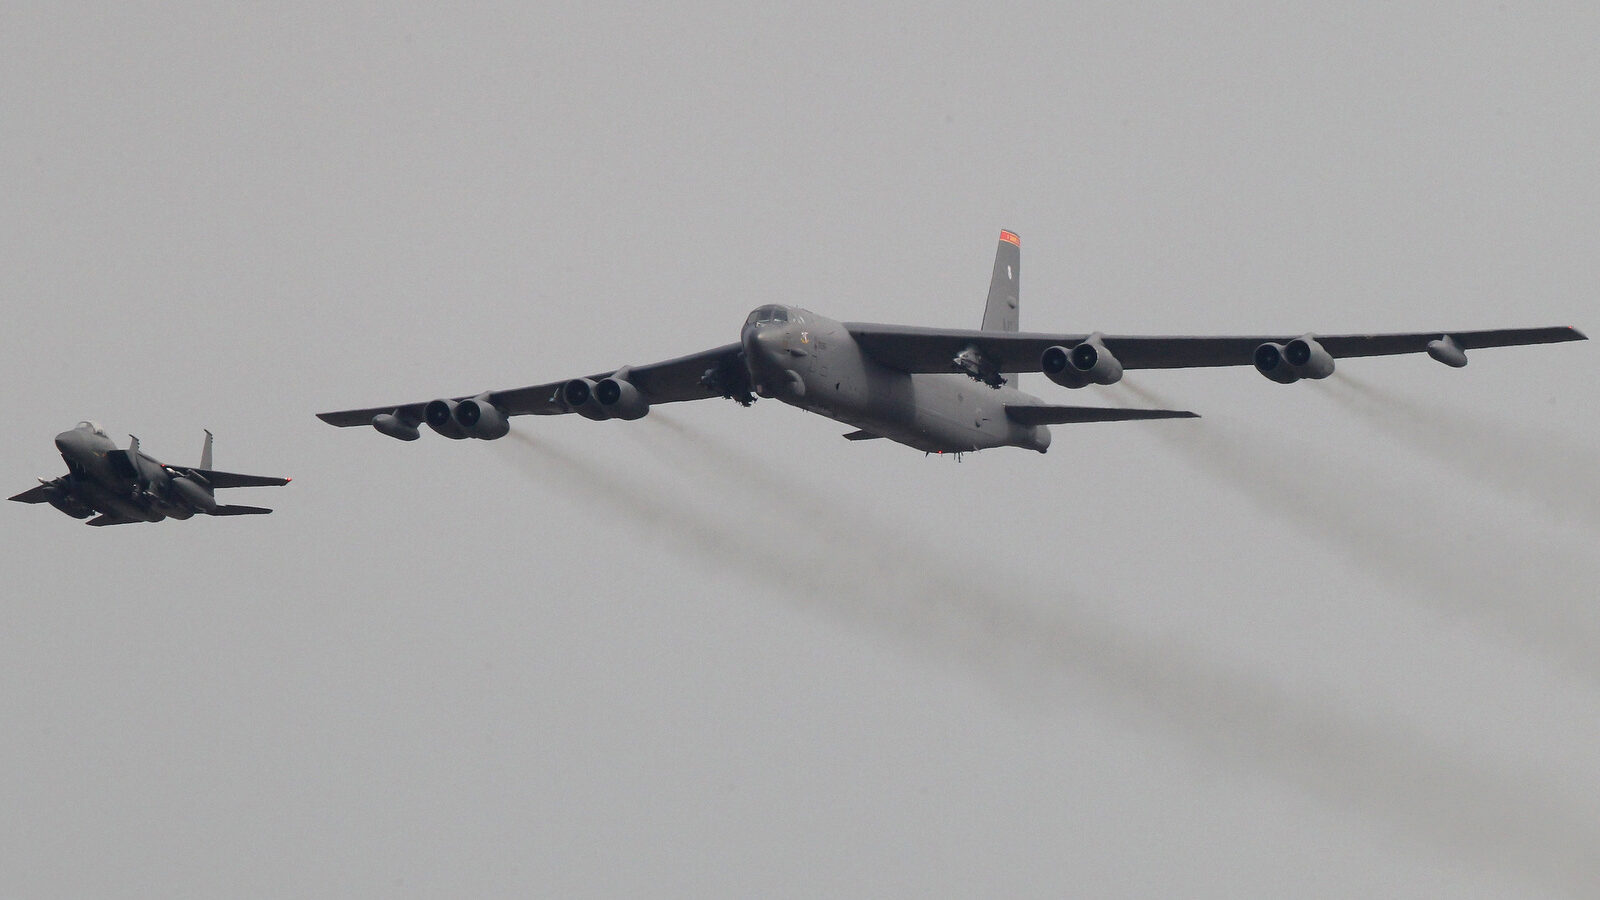 A U.S. Air Force B-52 bomber flies over Osan Air Base in Pyeongtaek, South Korea, Sunday, Jan. 10, 2016. The powerful U.S. B-52 bomber flew low over South Korea recently, a clear show of force from the United States as a Cold War-style standoff deepened between its ally Seoul and North Korea following Pyongyang's fourth nuclear test. (AP/Ahn Young-joon)